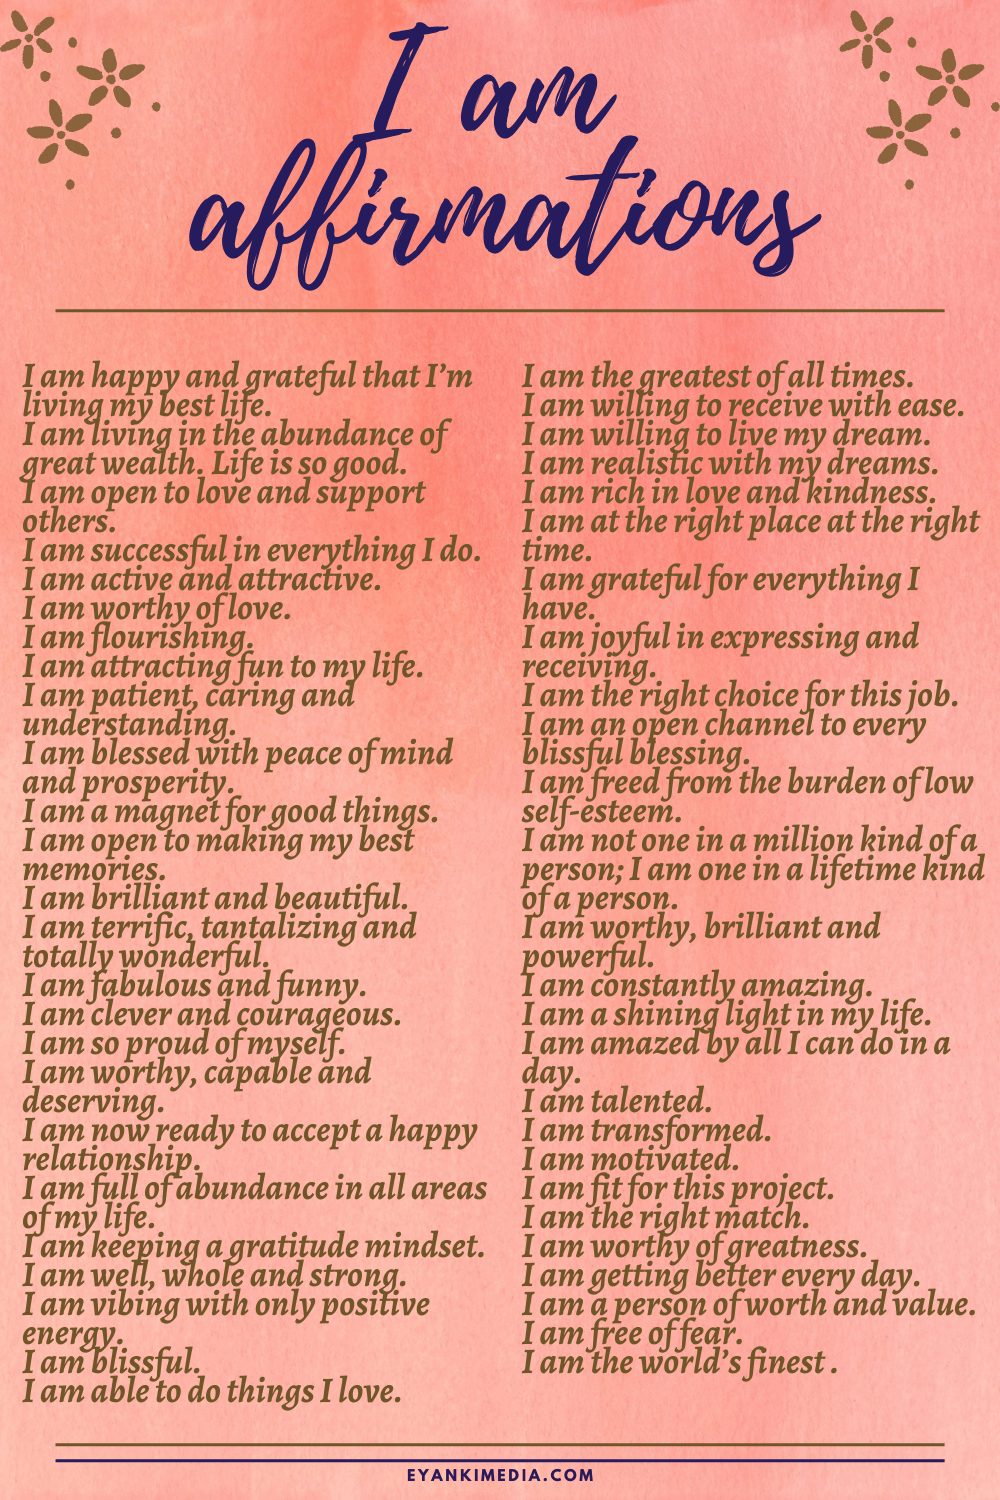 50-positive-i-am-affirmations-for-success-and-self-worth